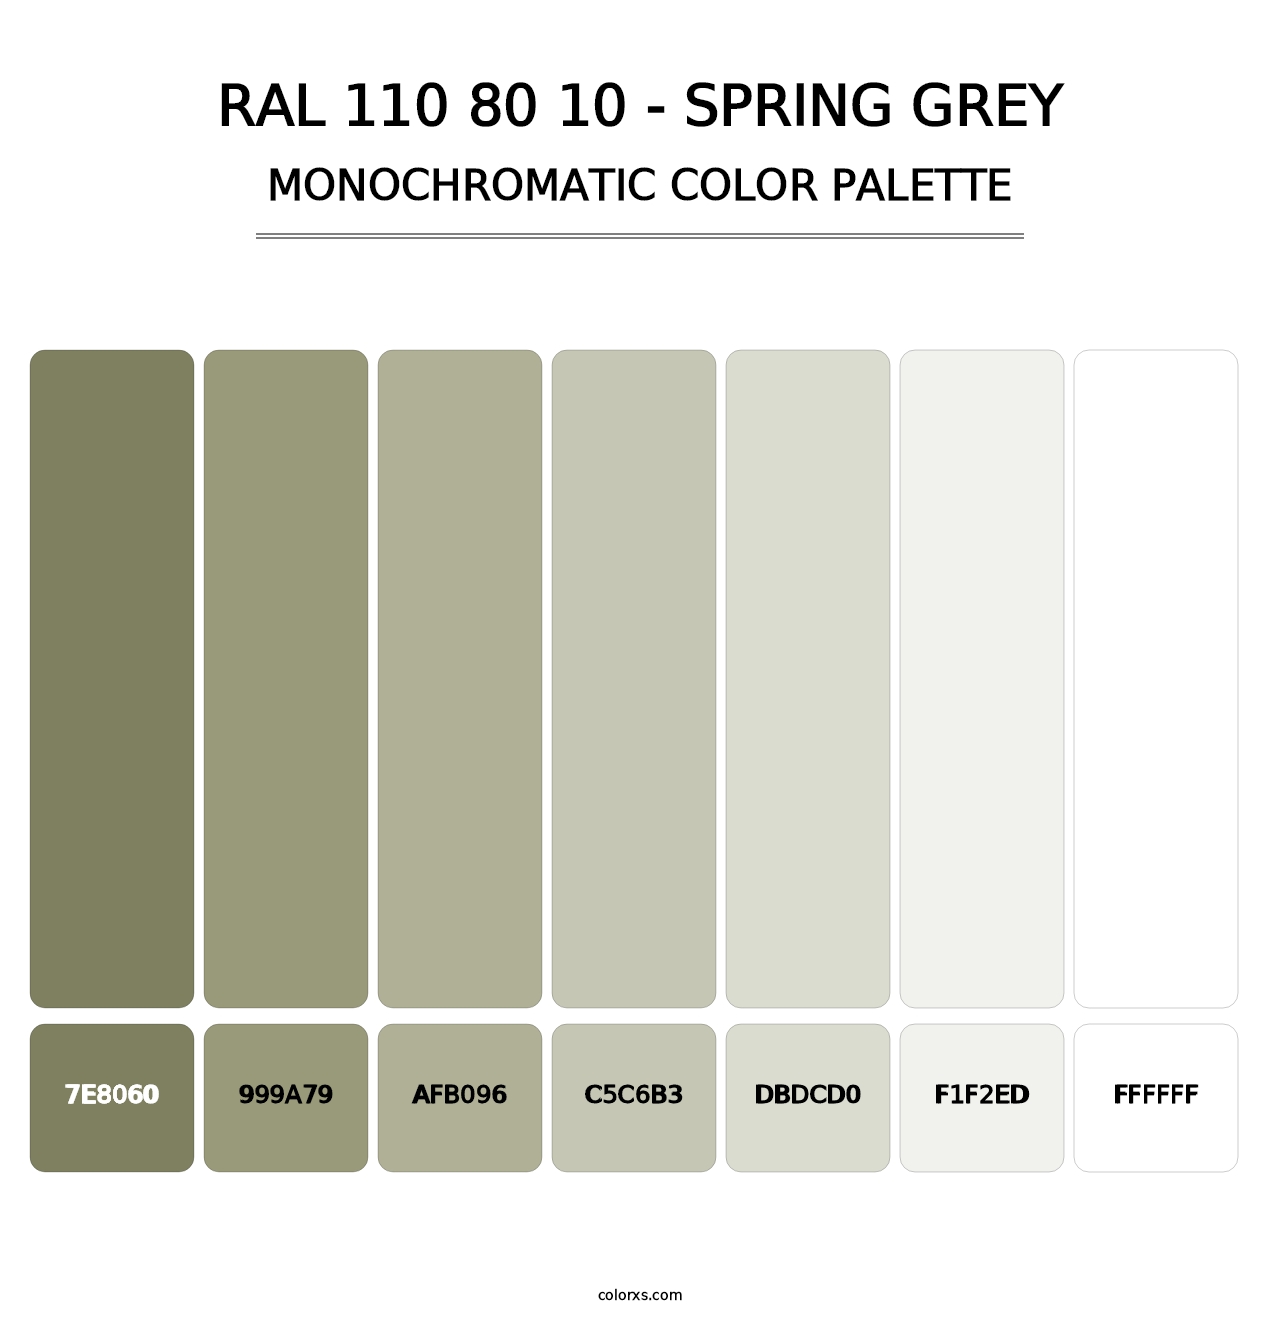 RAL 110 80 10 - Spring Grey - Monochromatic Color Palette